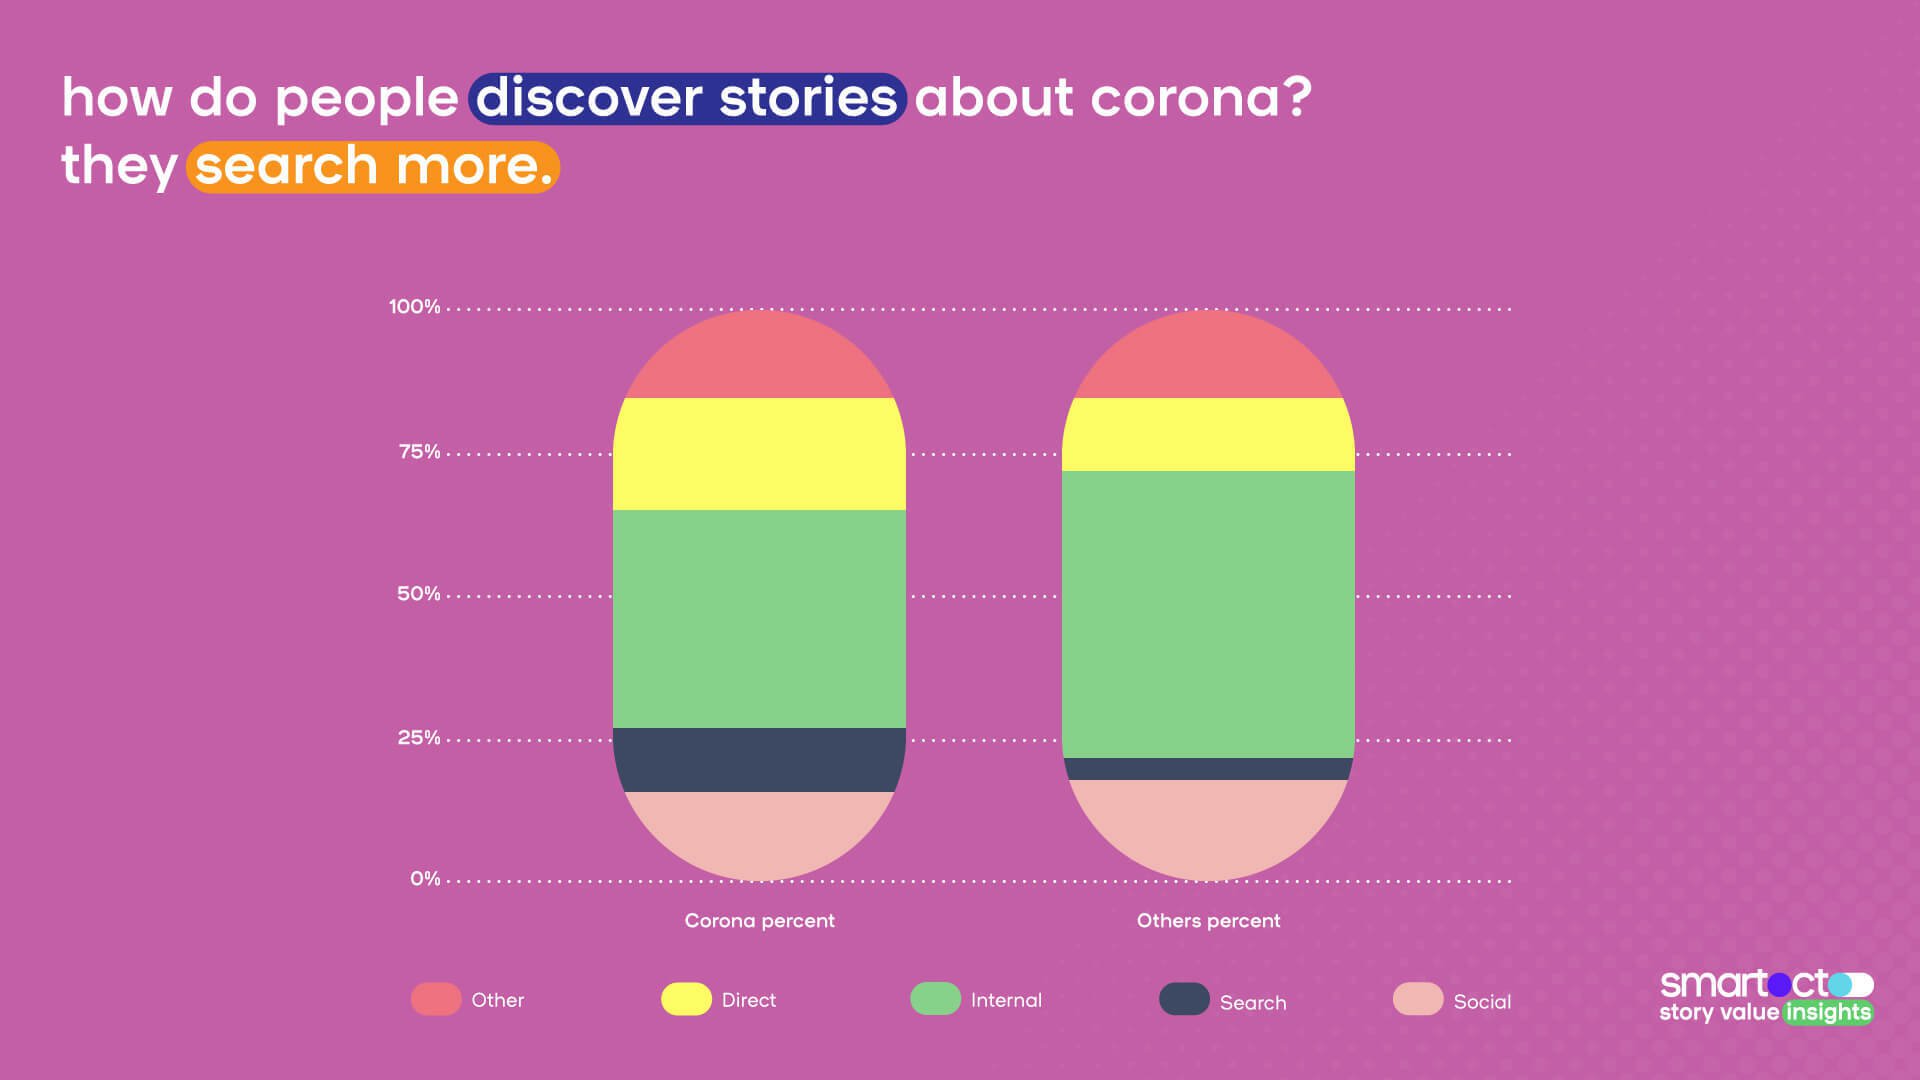 How do people discover stories about Corona?